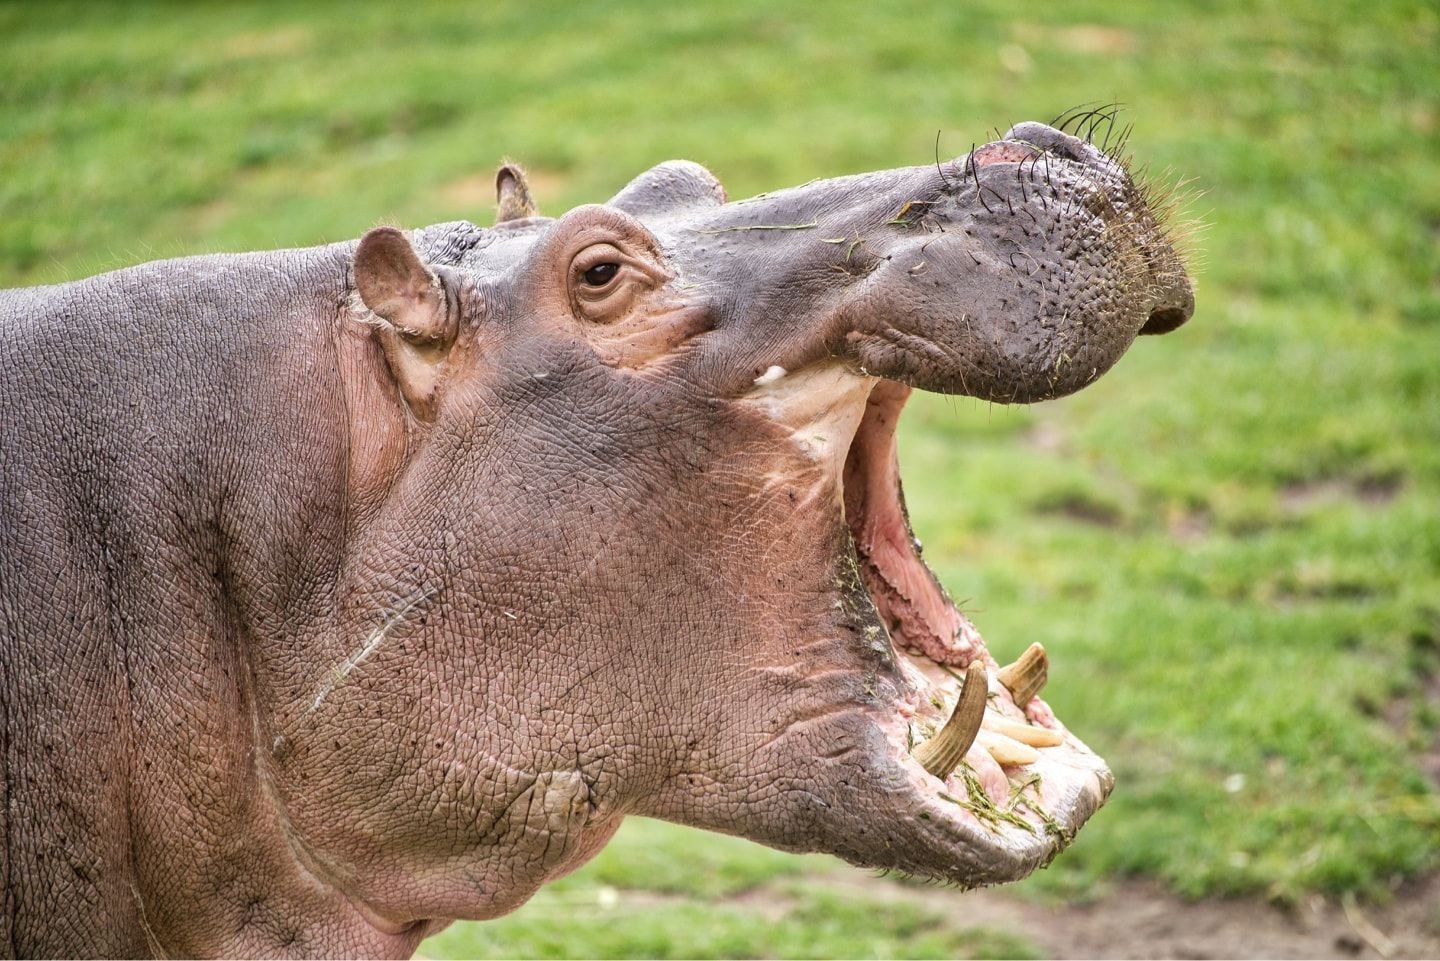 Hippo with his mouth open wide